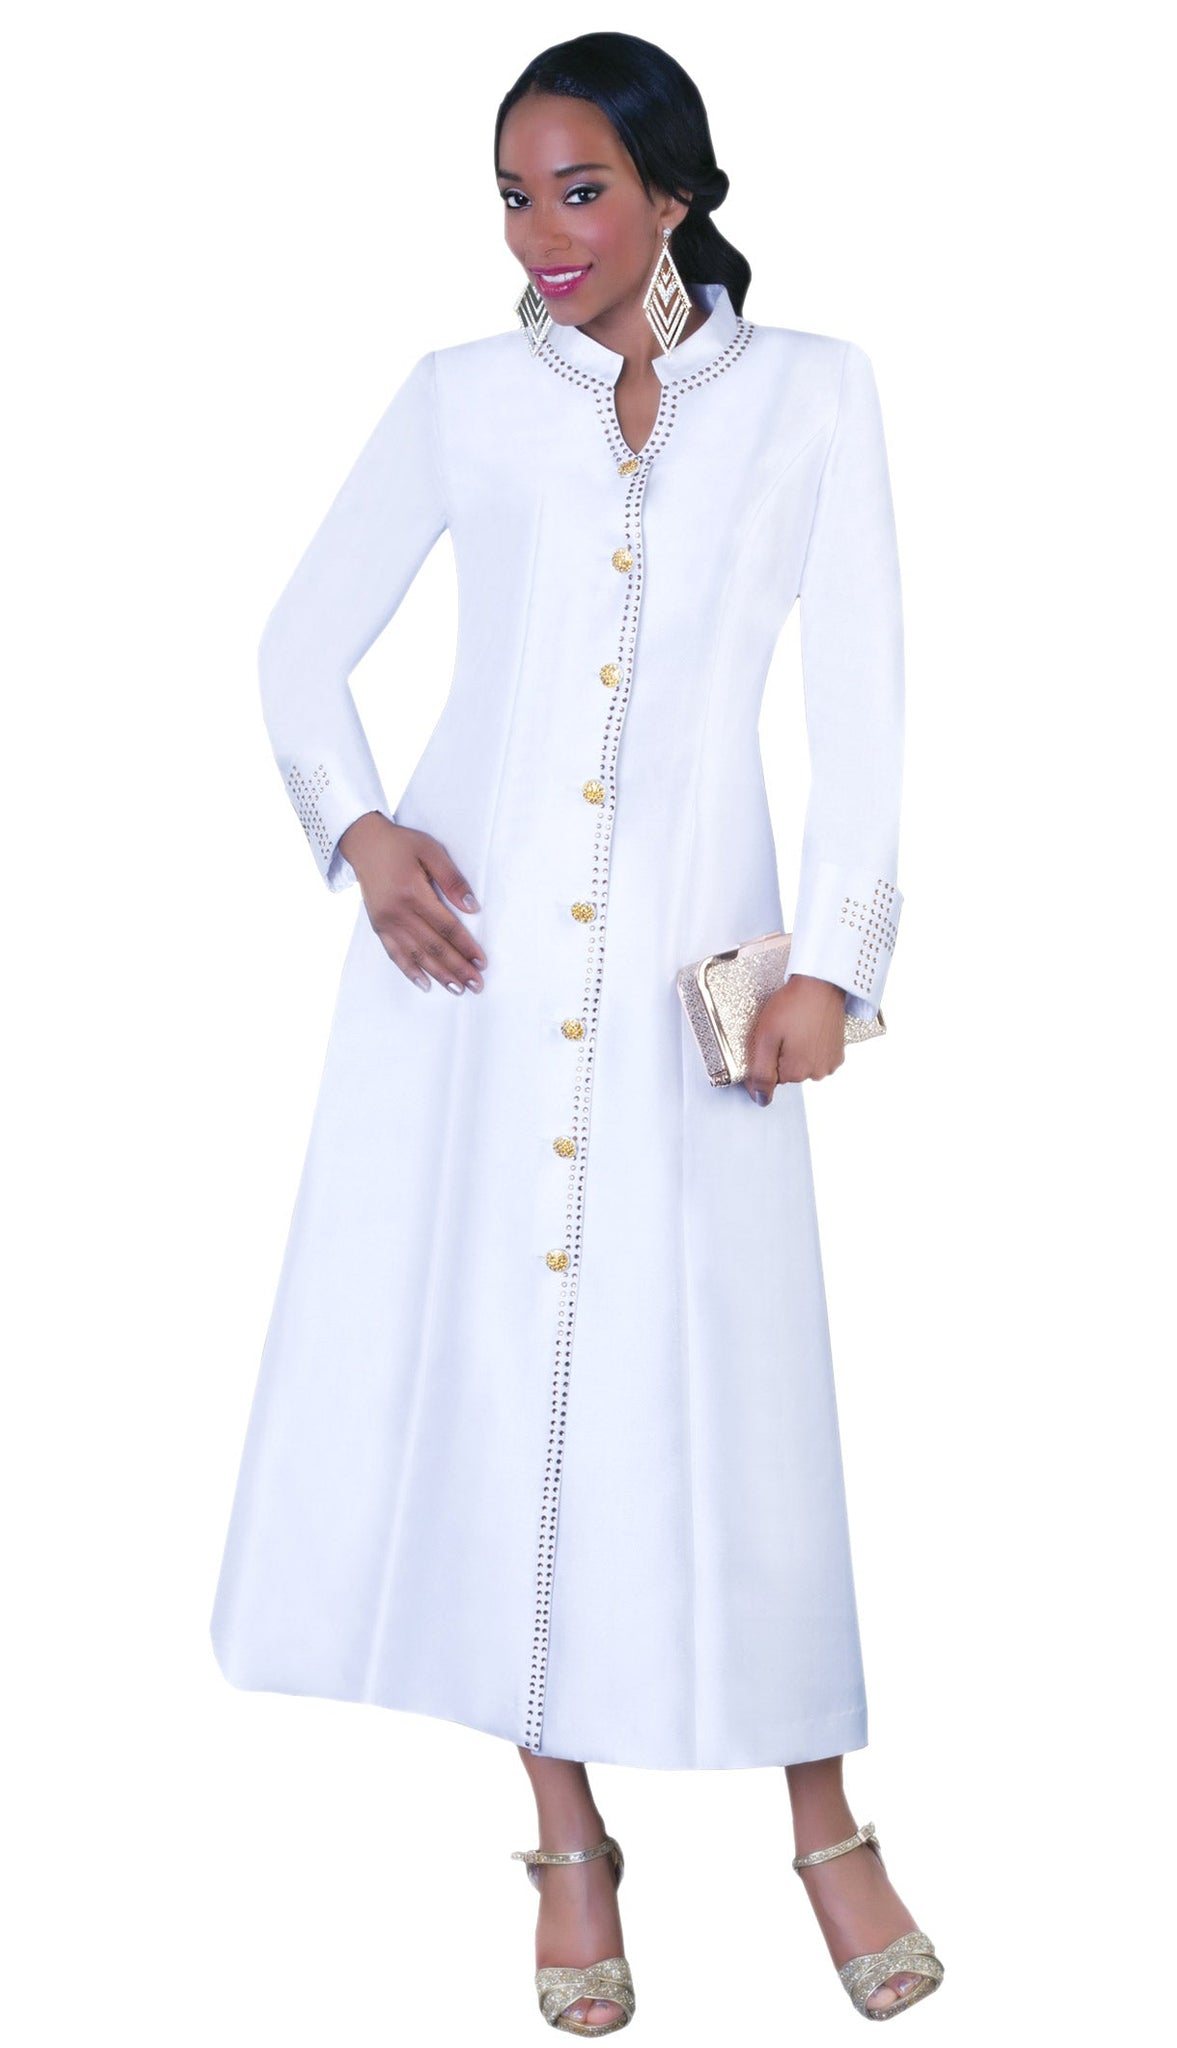 Tally Taylor Church Robe 4445-White - Church Suits For Less